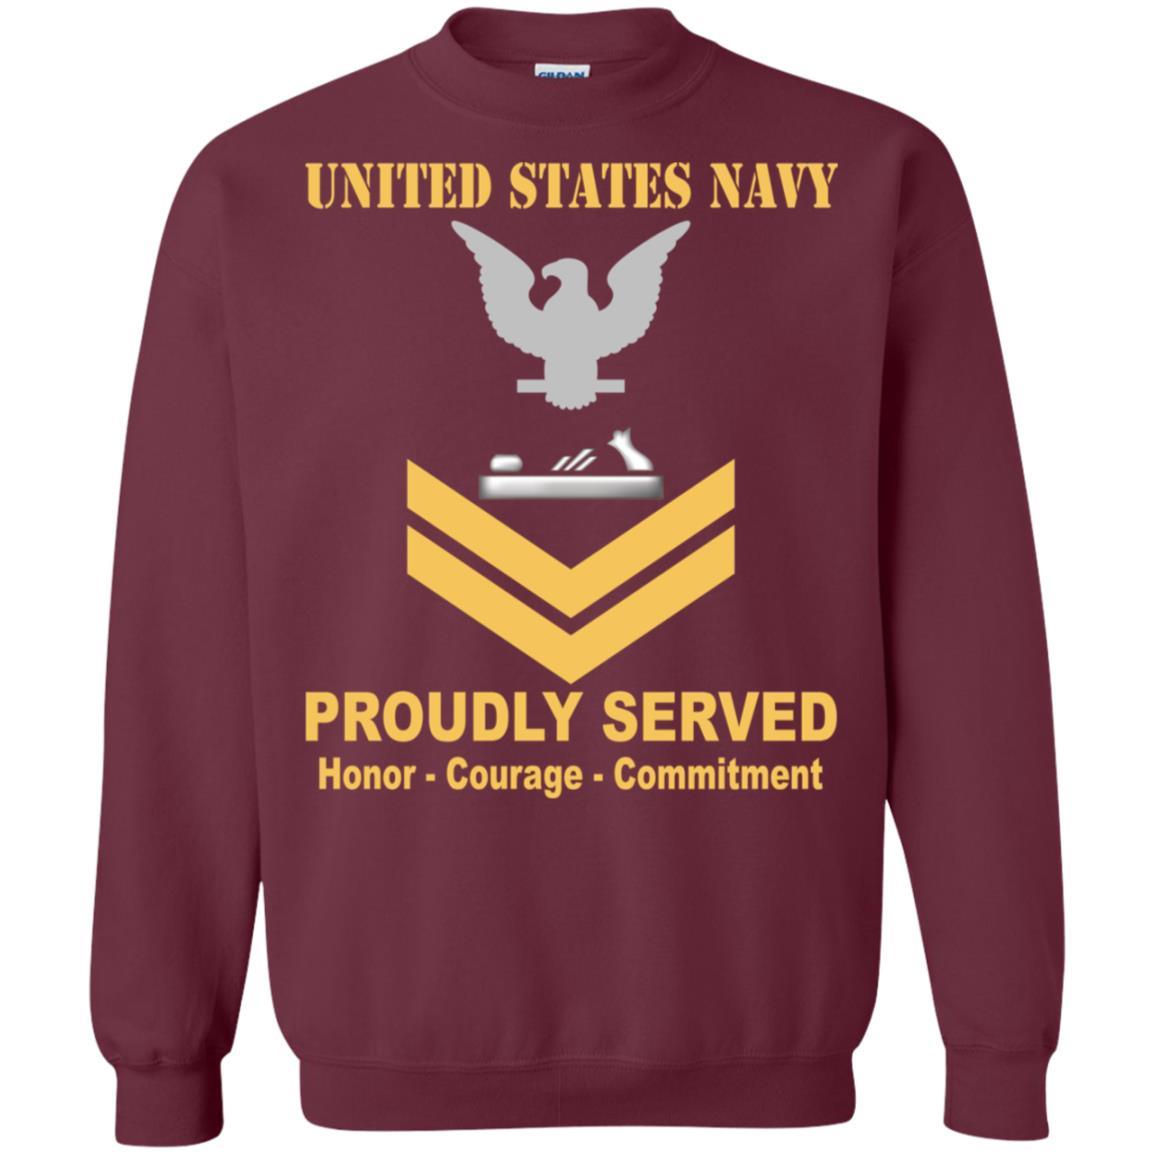 Navy Patternmaker Navy PM E-5 Rating Badges Proudly Served T-Shirt For Men On Front-TShirt-Navy-Veterans Nation